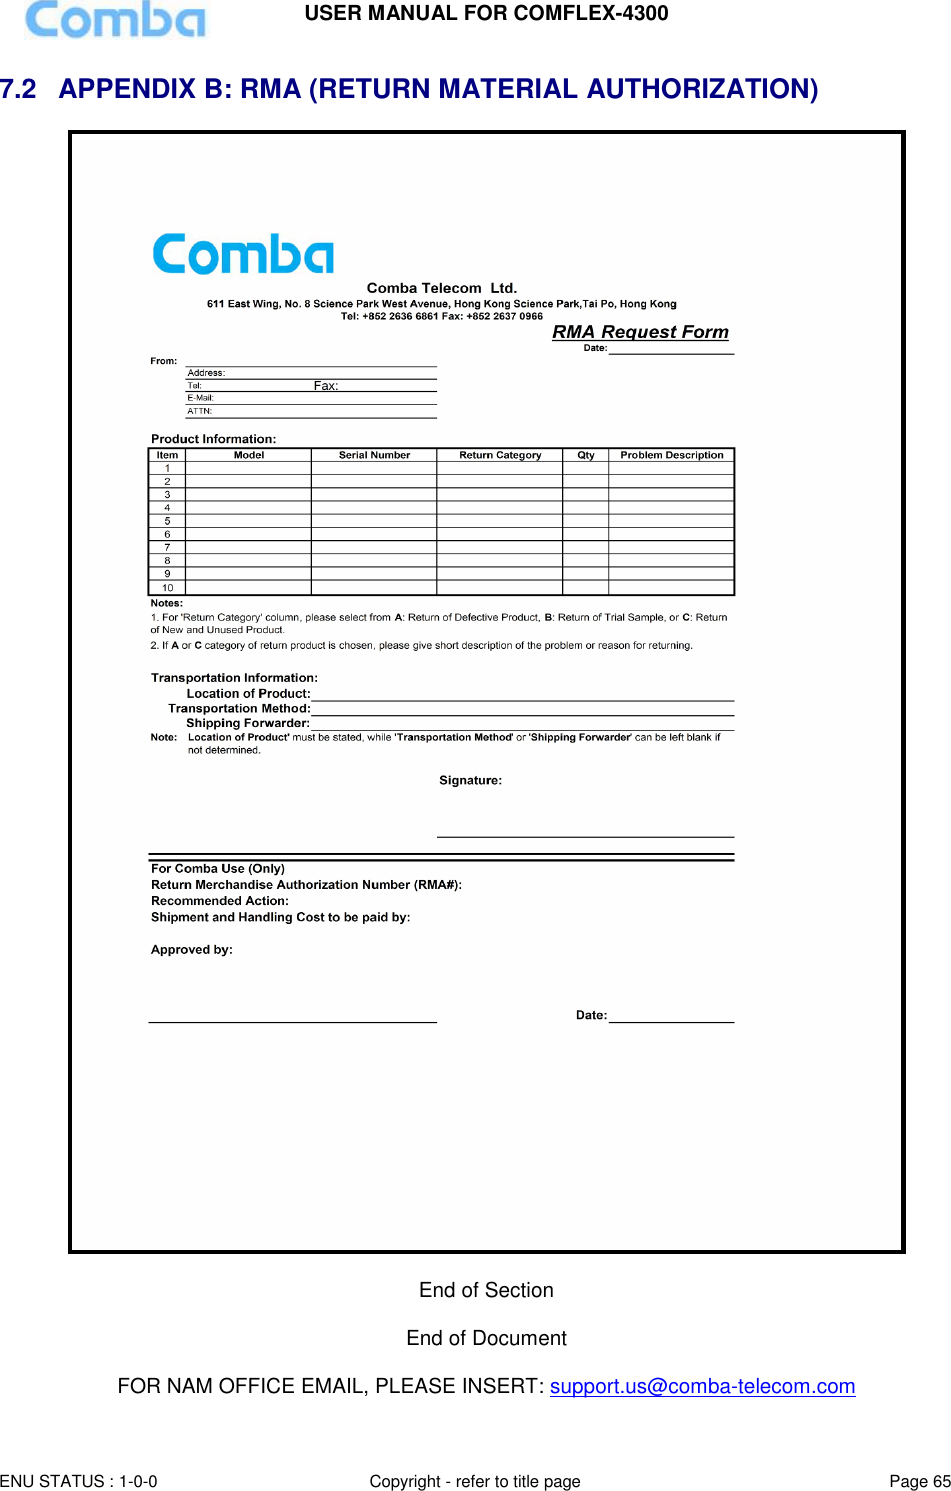 USER MANUAL FOR COMFLEX-4300  ENU STATUS : 1-0-0 Copyright - refer to title page Page 65     7.2  APPENDIX B: RMA (RETURN MATERIAL AUTHORIZATION)   End of Section  End of Document  FOR NAM OFFICE EMAIL, PLEASE INSERT: support.us@comba-telecom.com 